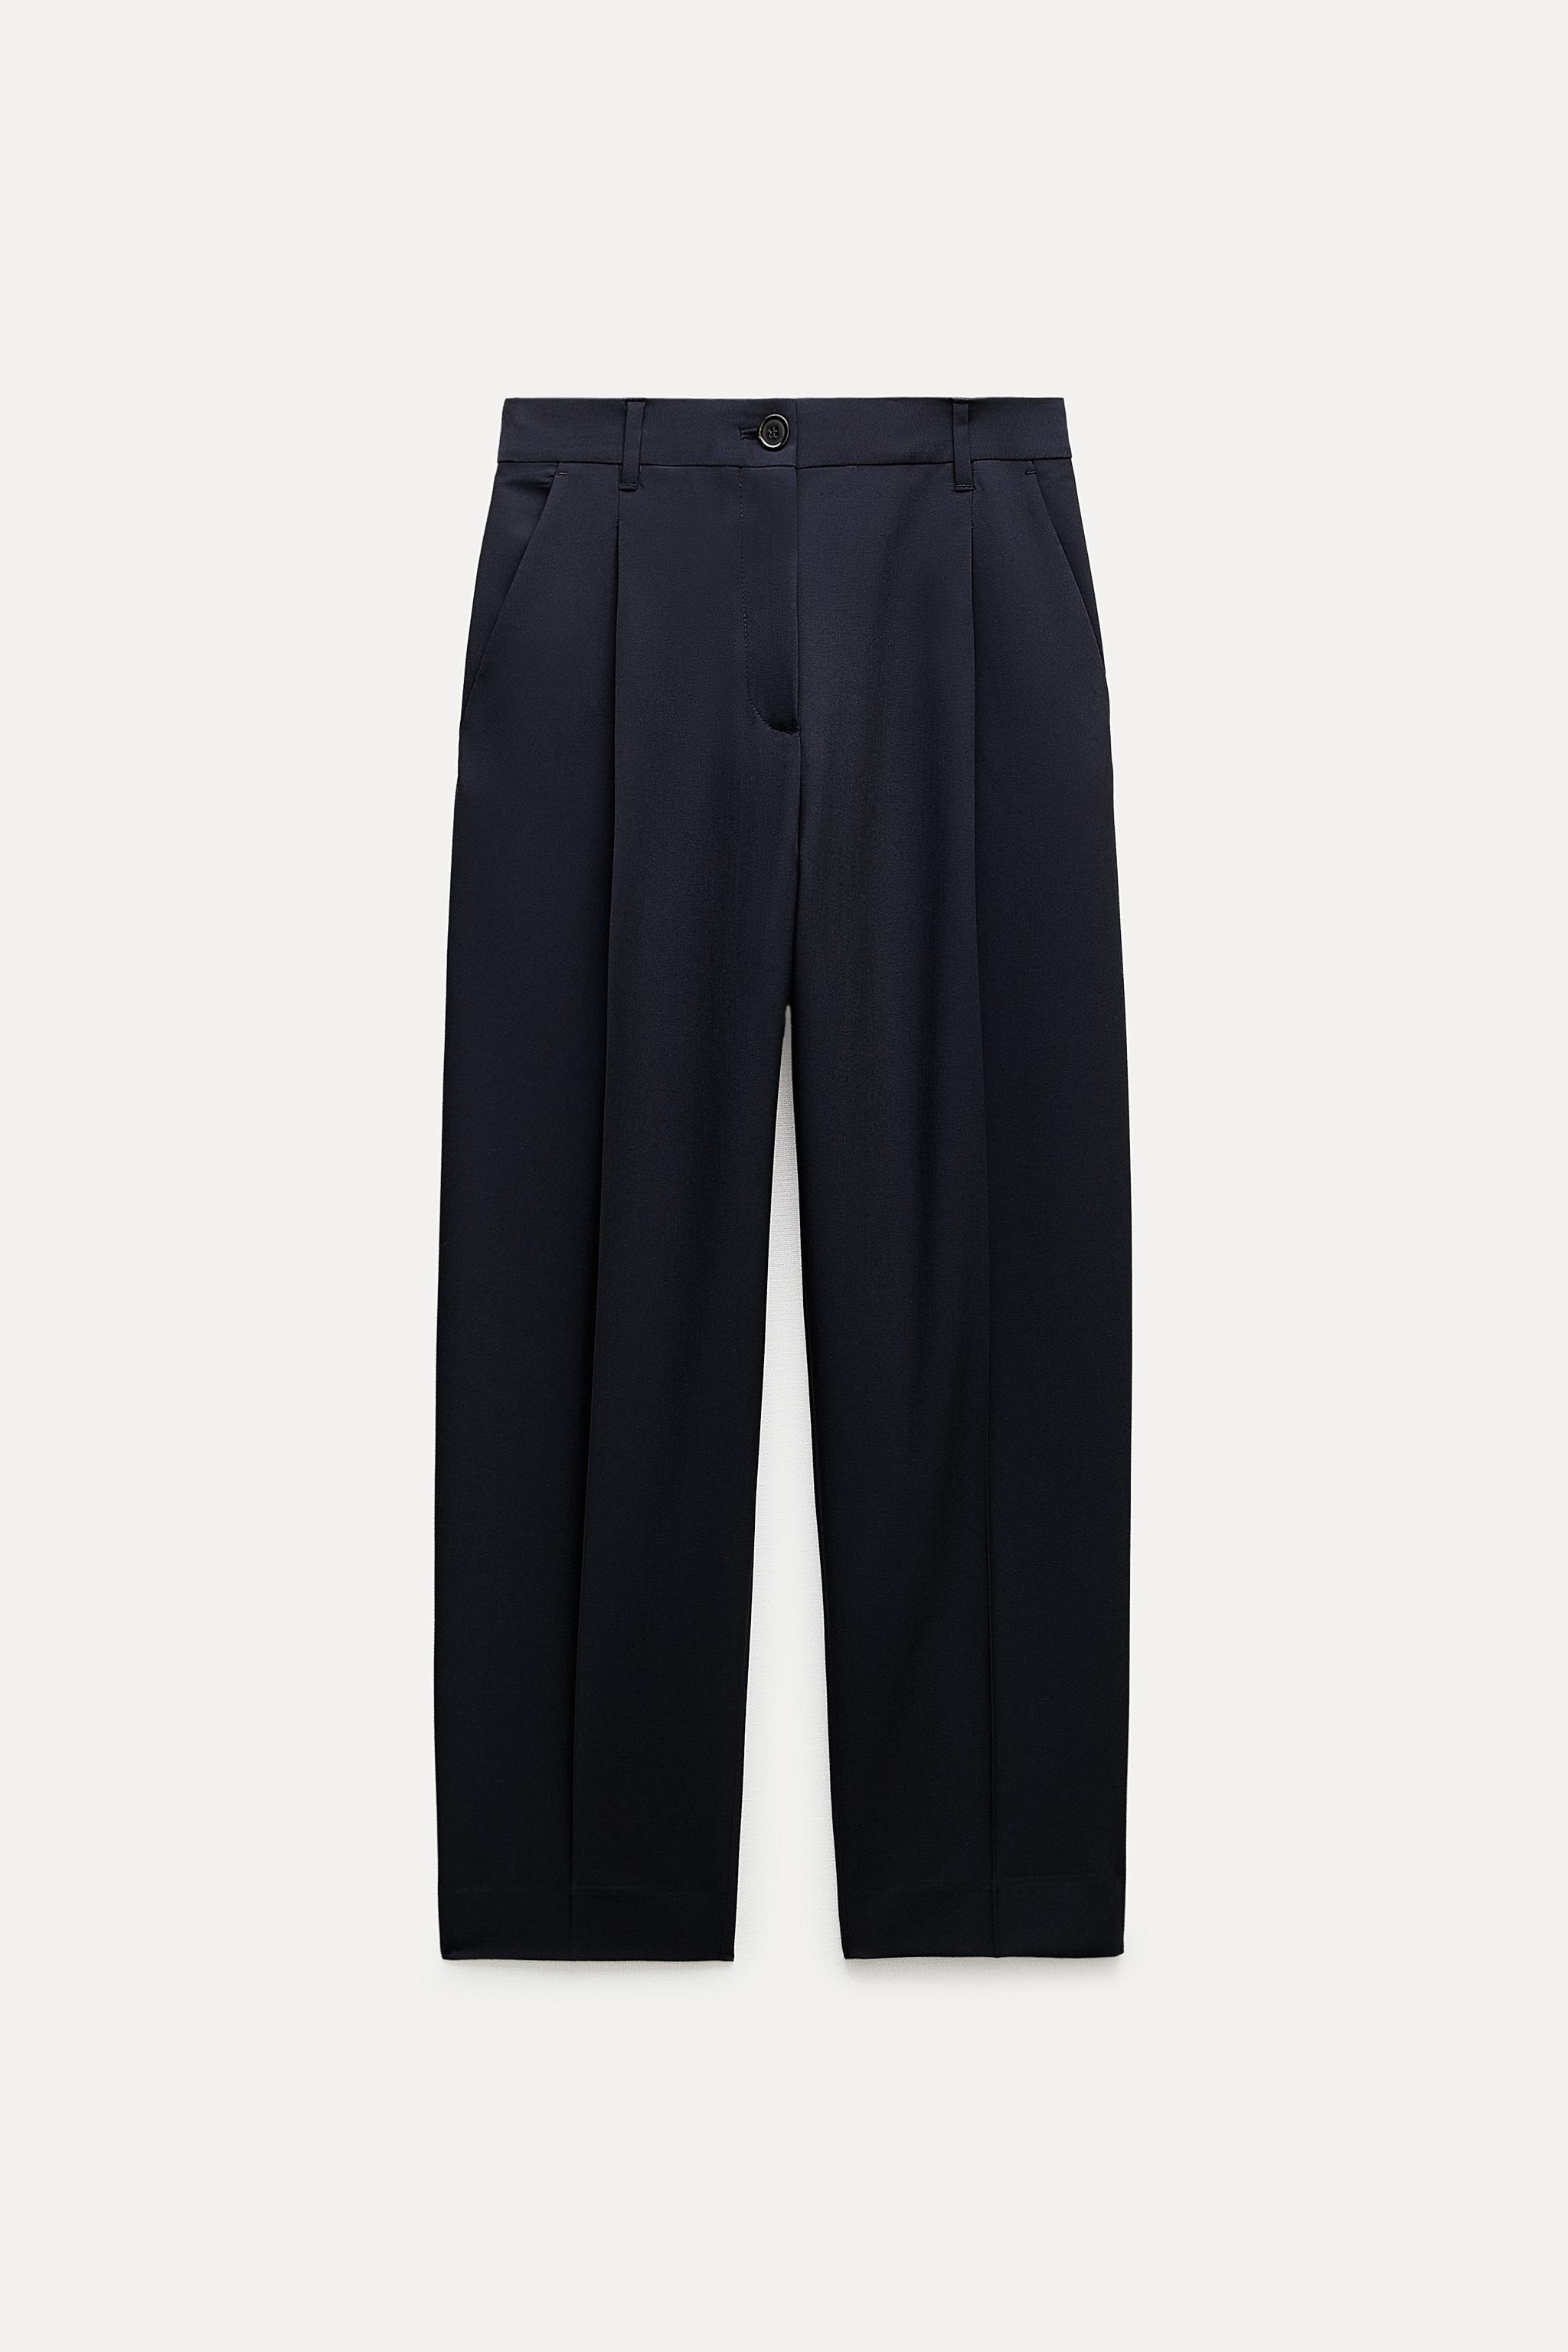 PLEATED PANTS ZW COLLECTION - Navy blue | ZARA Canada